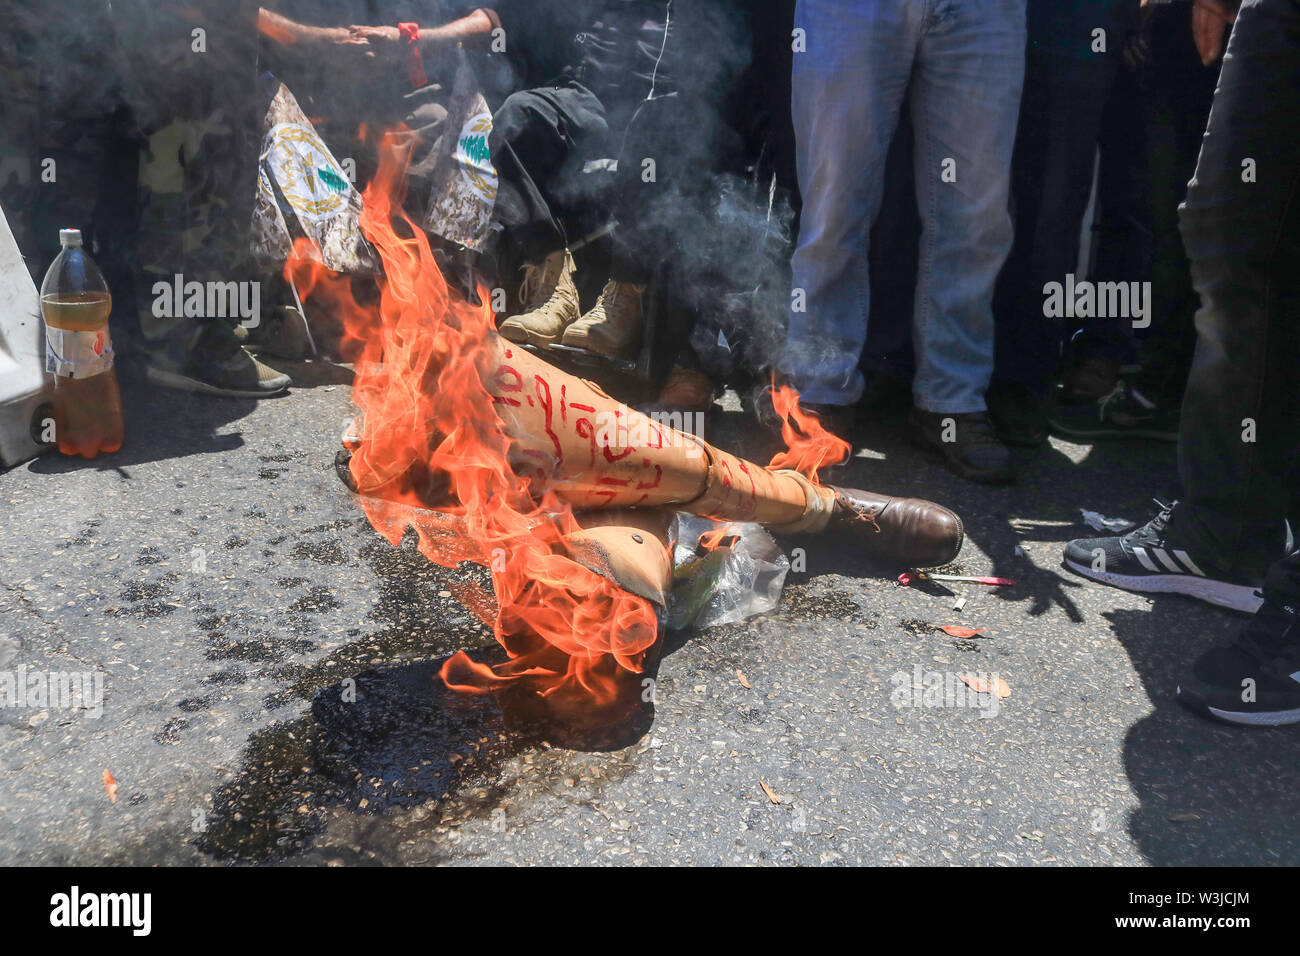 Beirut Lebanon. 16th July 2019. Retired soldiers of the Lebanese  army set fire to a veteran's prosthetic legs as they  protest against cuts in state pensions and over austerity budget measures being debated by in Parliament as  planned cuts have unleashed a wave of public discontent, which have  targeted pensions, wages, services and social benefits.Credit: amer ghazzal/Alamy Live News Stock Photo